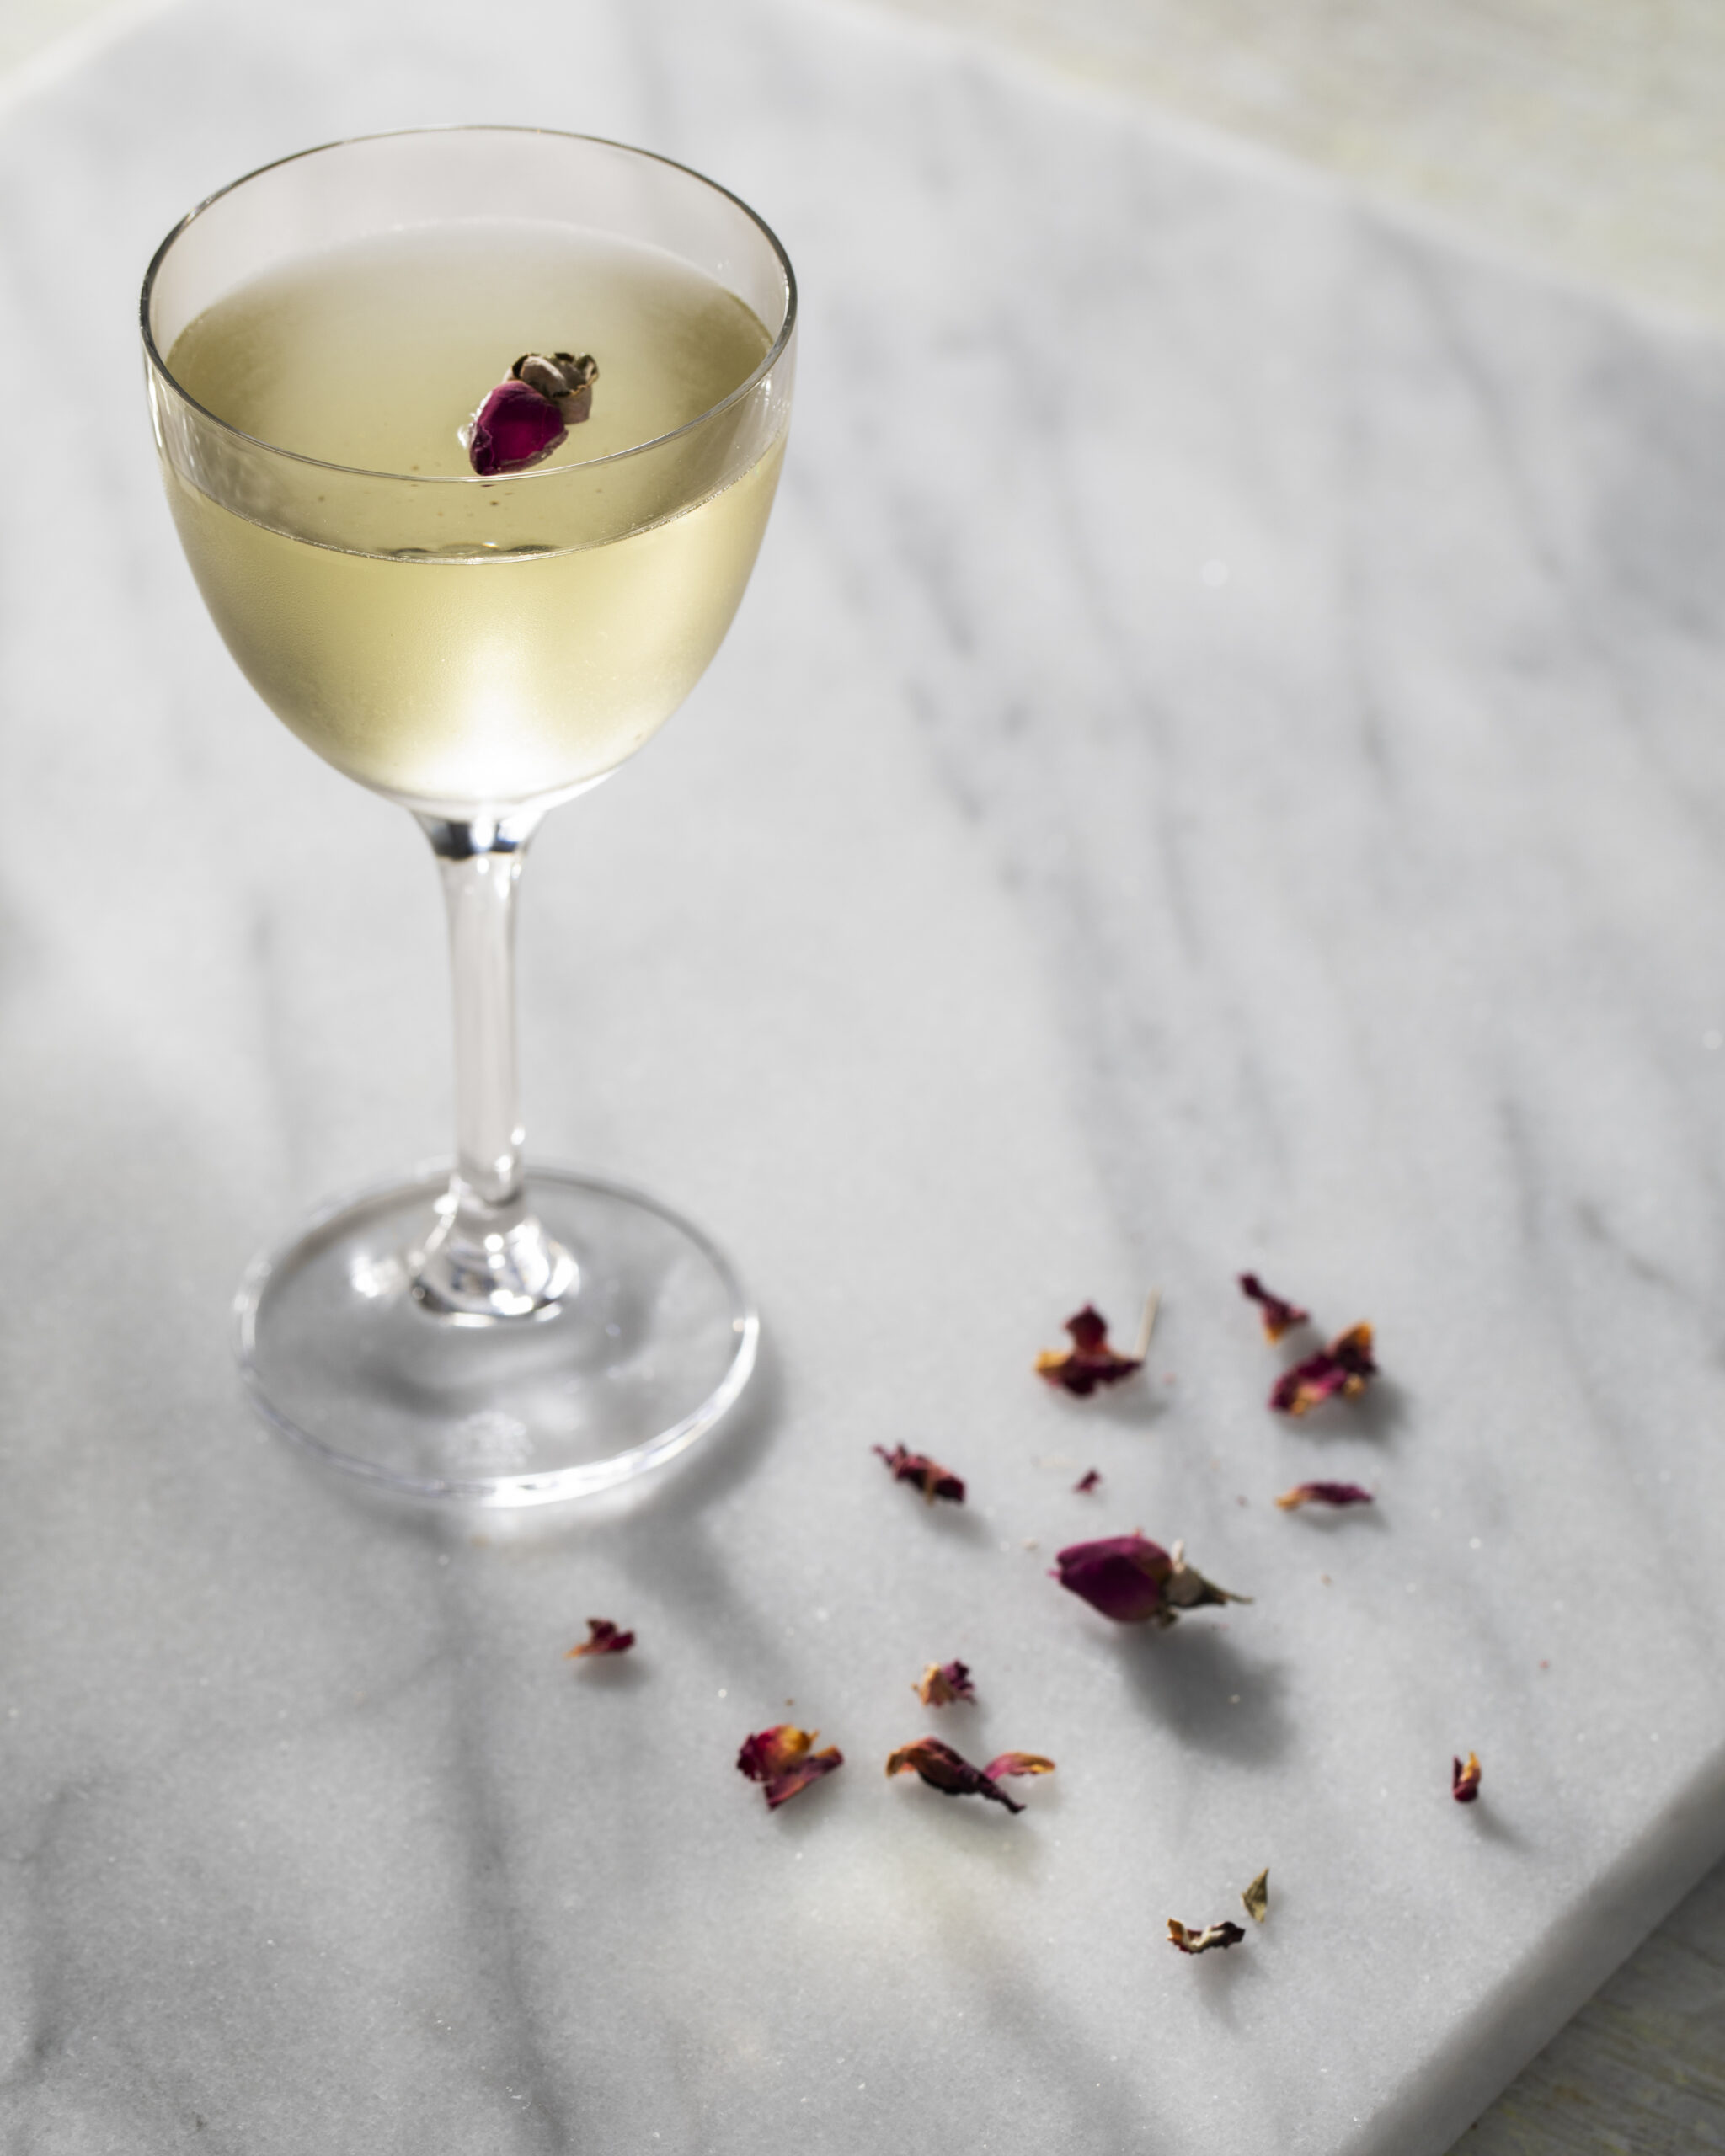 A slightly yellow in color Rose and Black Pepper Martini in a martini glass sits on a white granite countertop. Rose petals are off to the side.